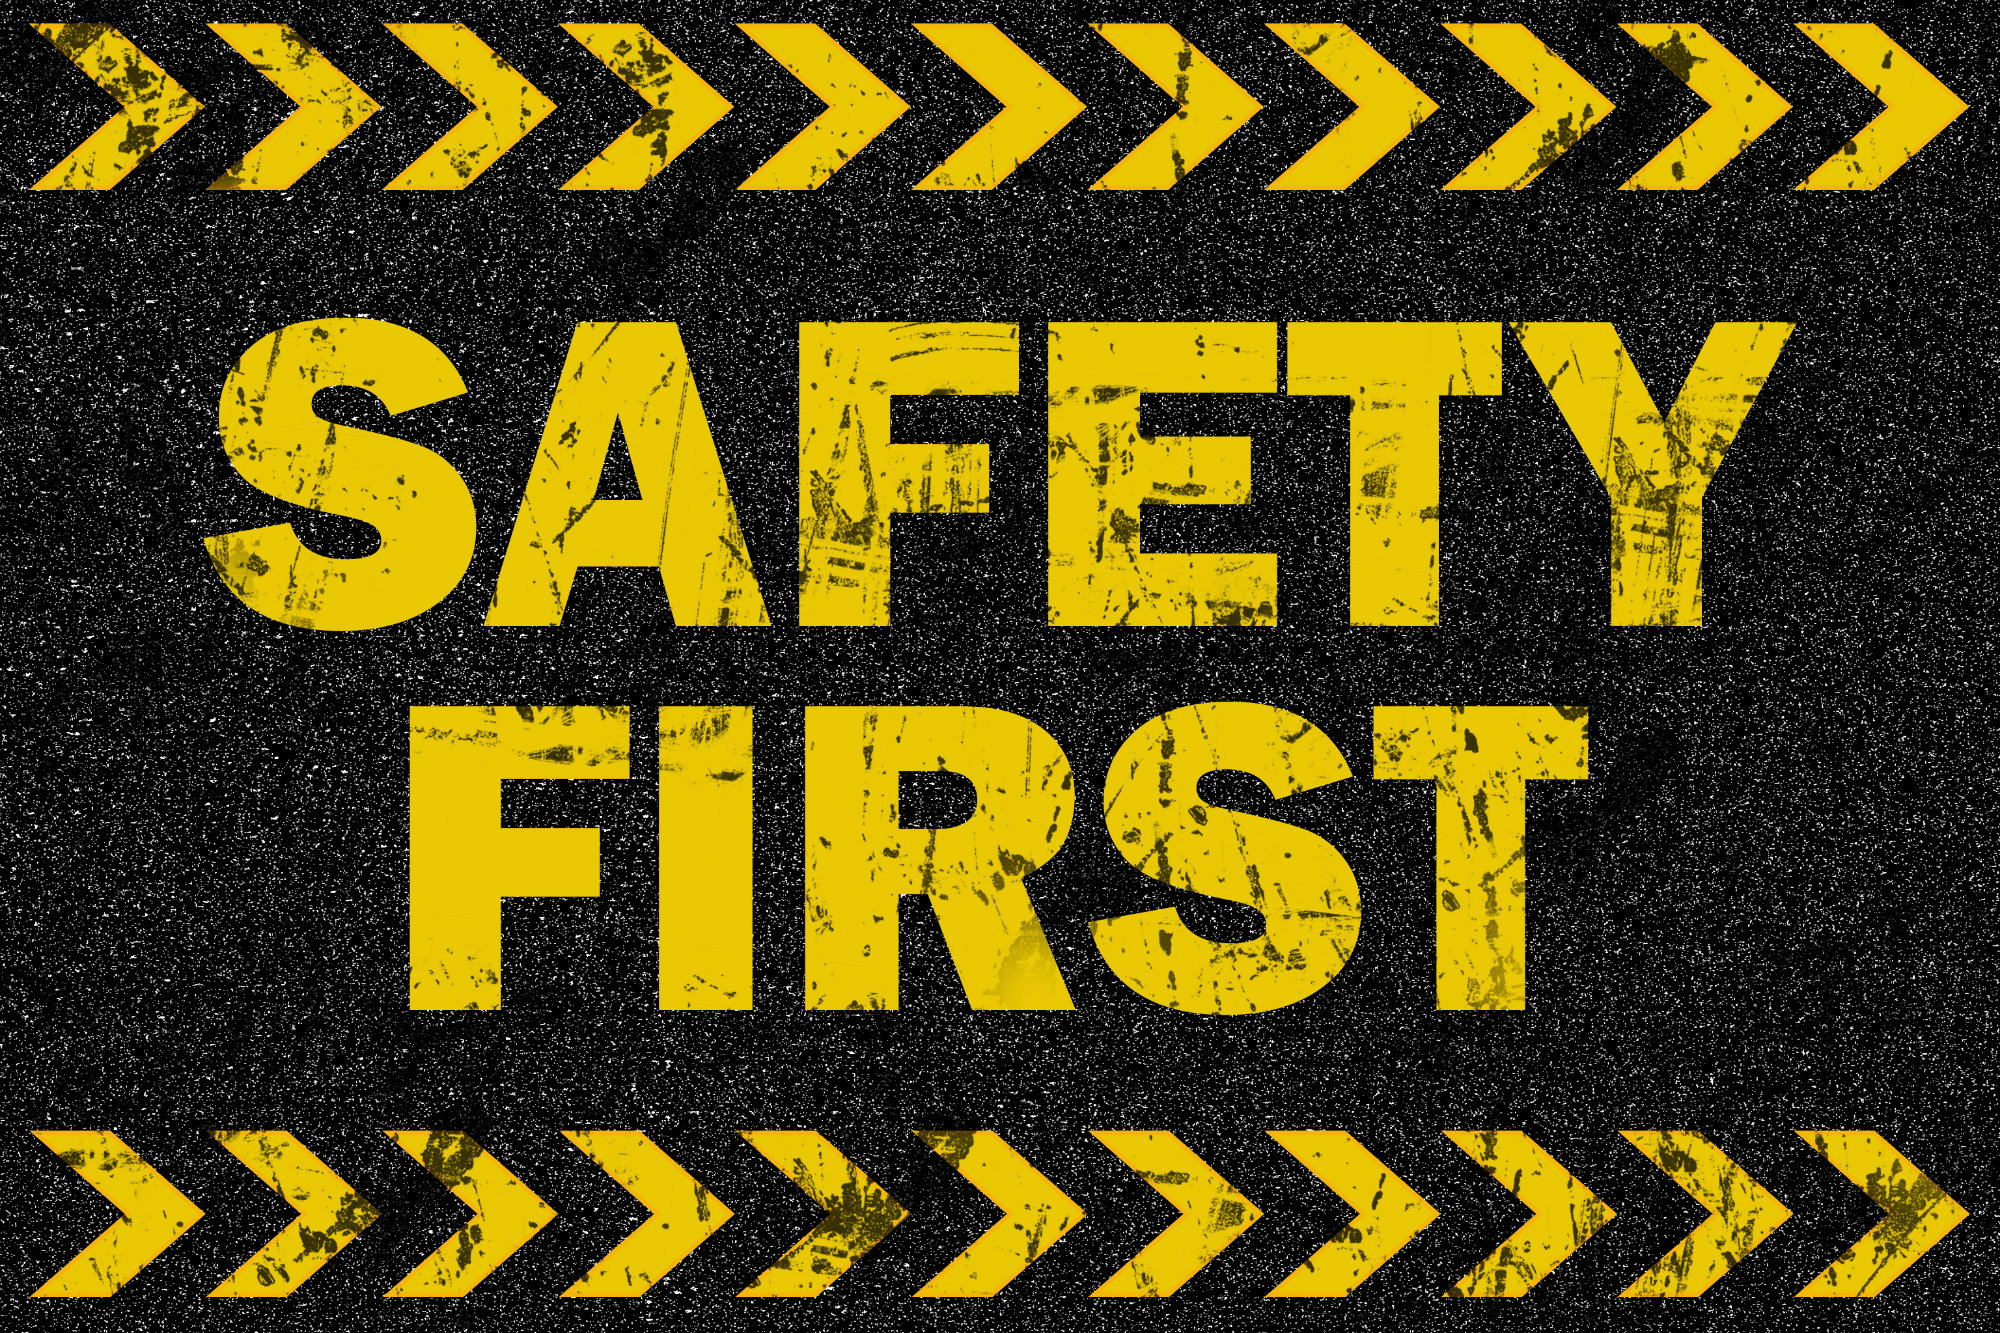 End of Validity Dates for Safety Equipment